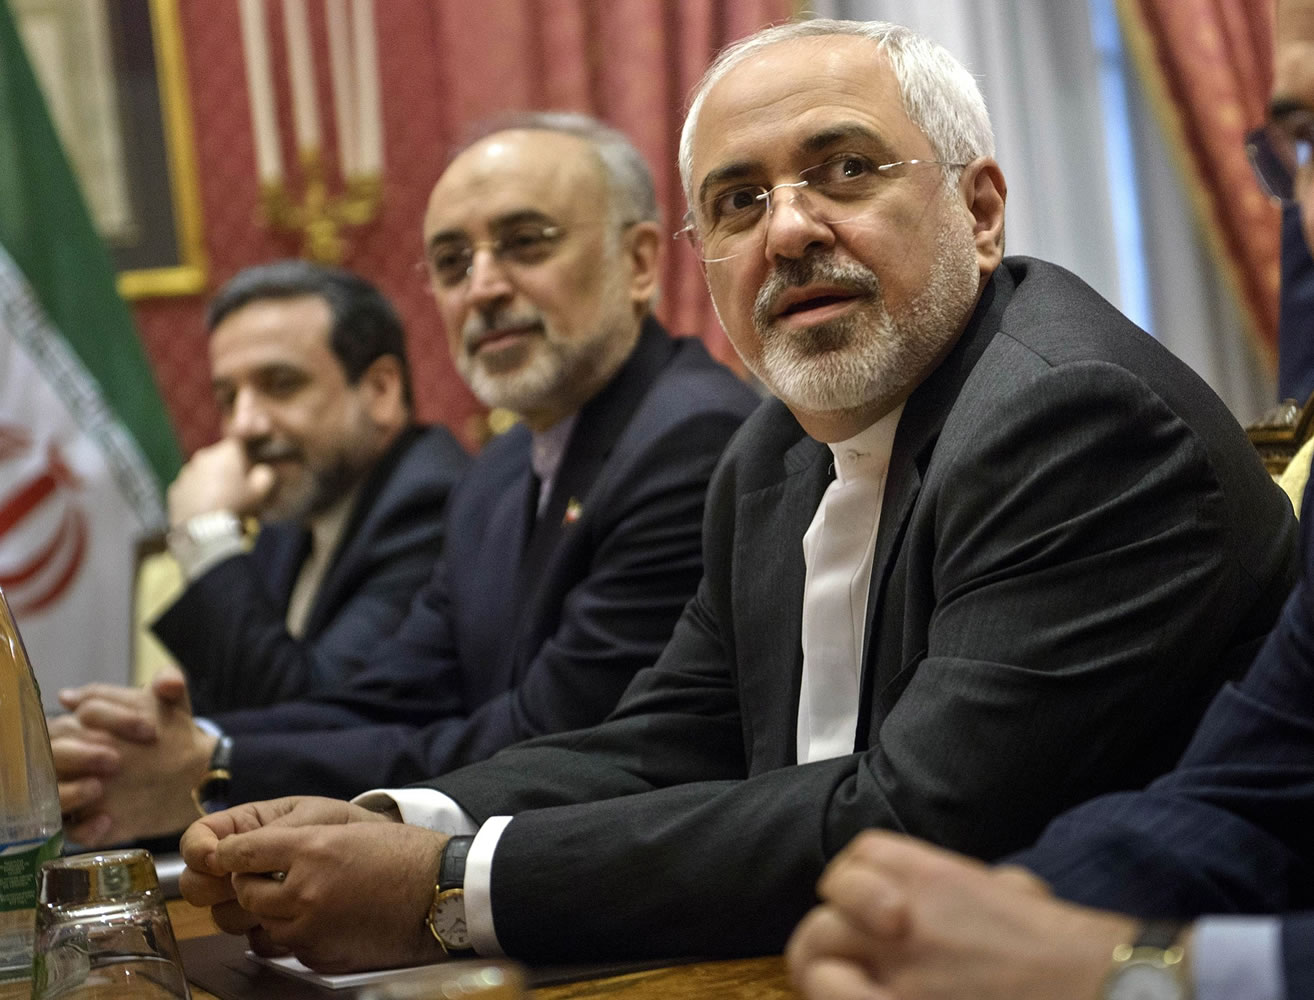 Iranian Foreign Mohammad Minister Javad Zarif , right, waits for the start of a meeting with a US delegation at a hotel in Lausanne Switzerland  on Thursday March 26, 2015 during negotiations on the Iranian nuclear programme.